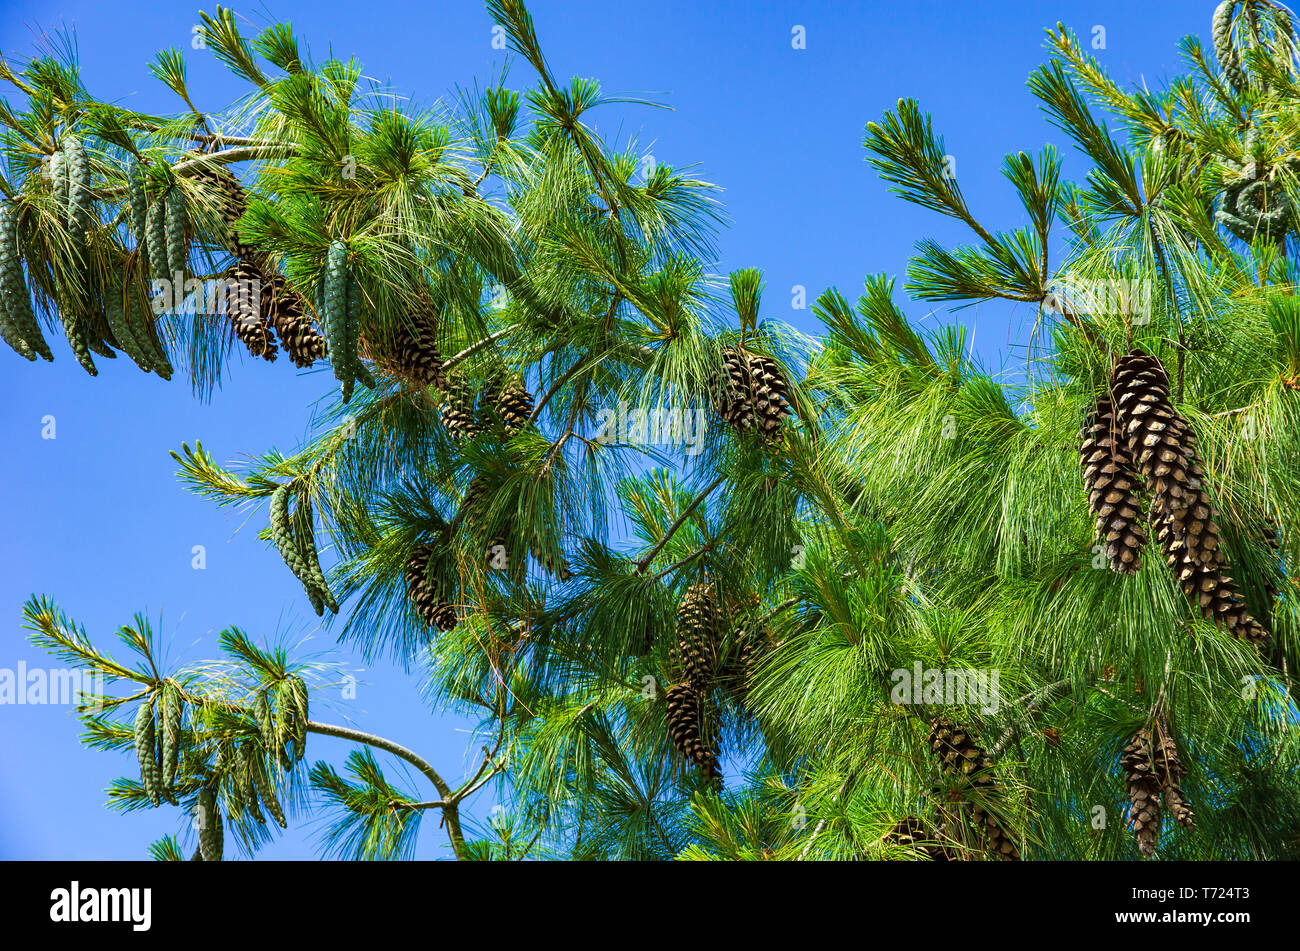 Branches of the Weymouth pine, Pinus strobus, full of ripe cones. Stock Photo